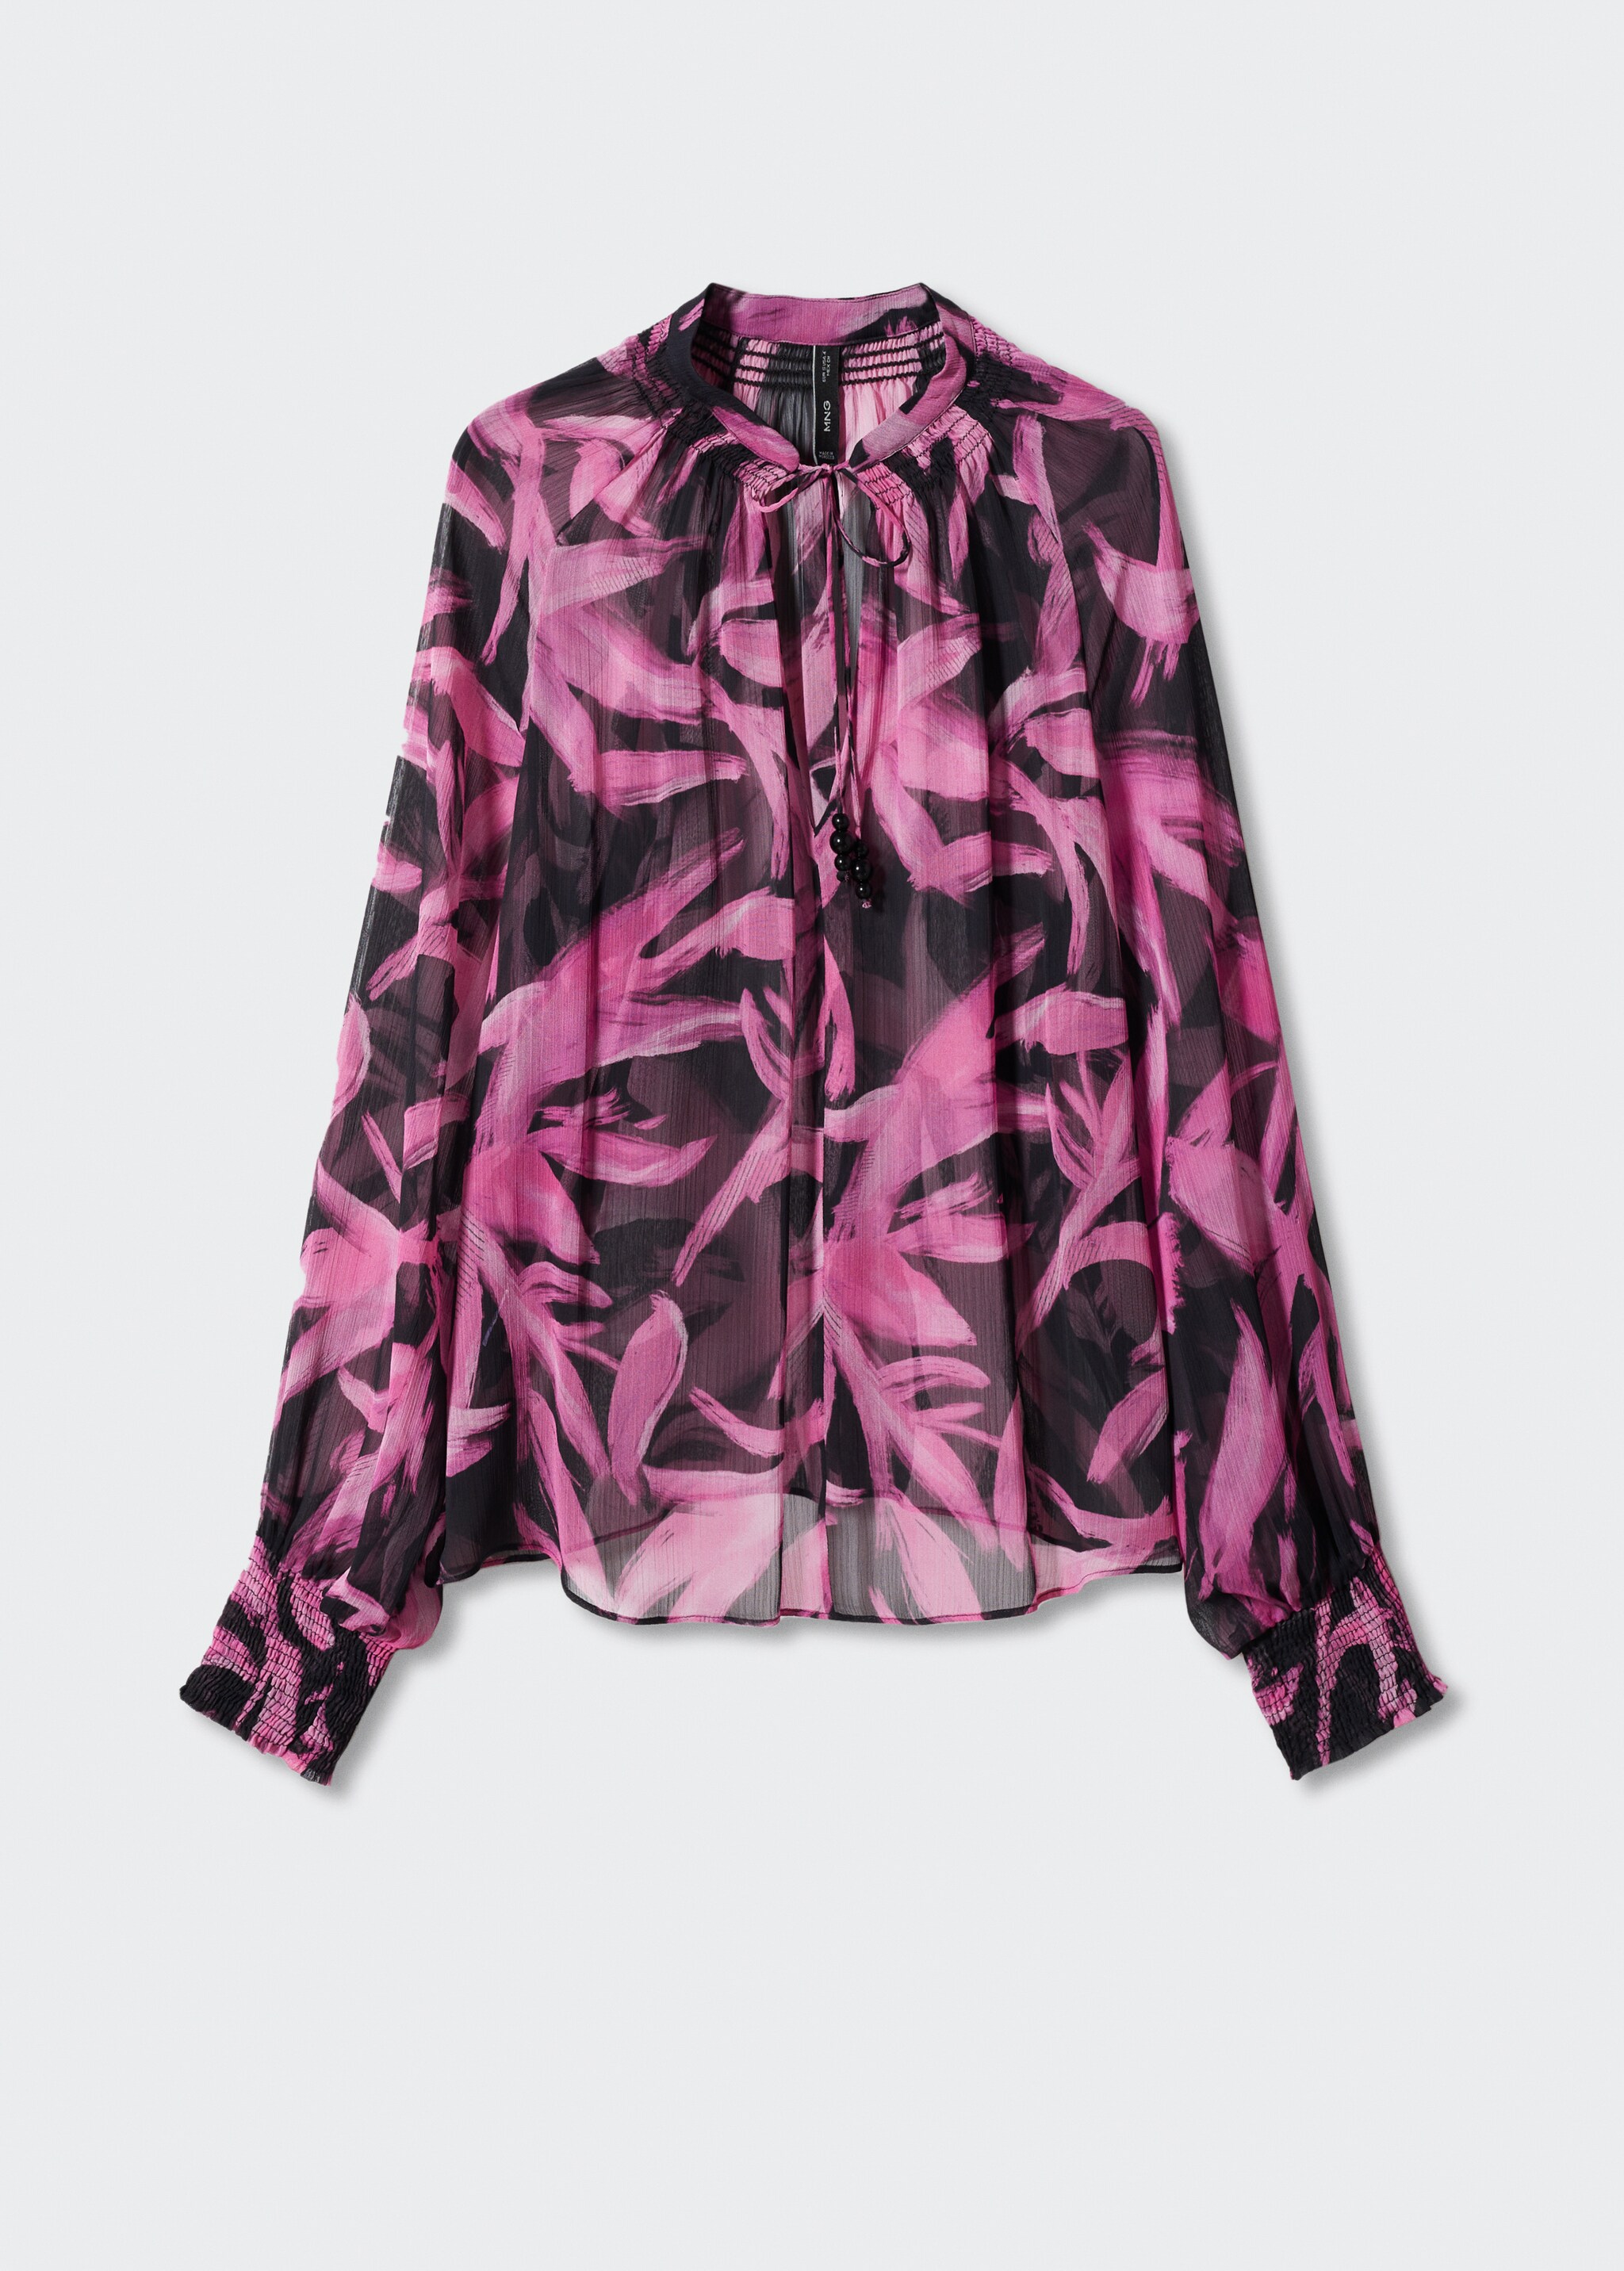 Printed chiffon blouse - Article without model